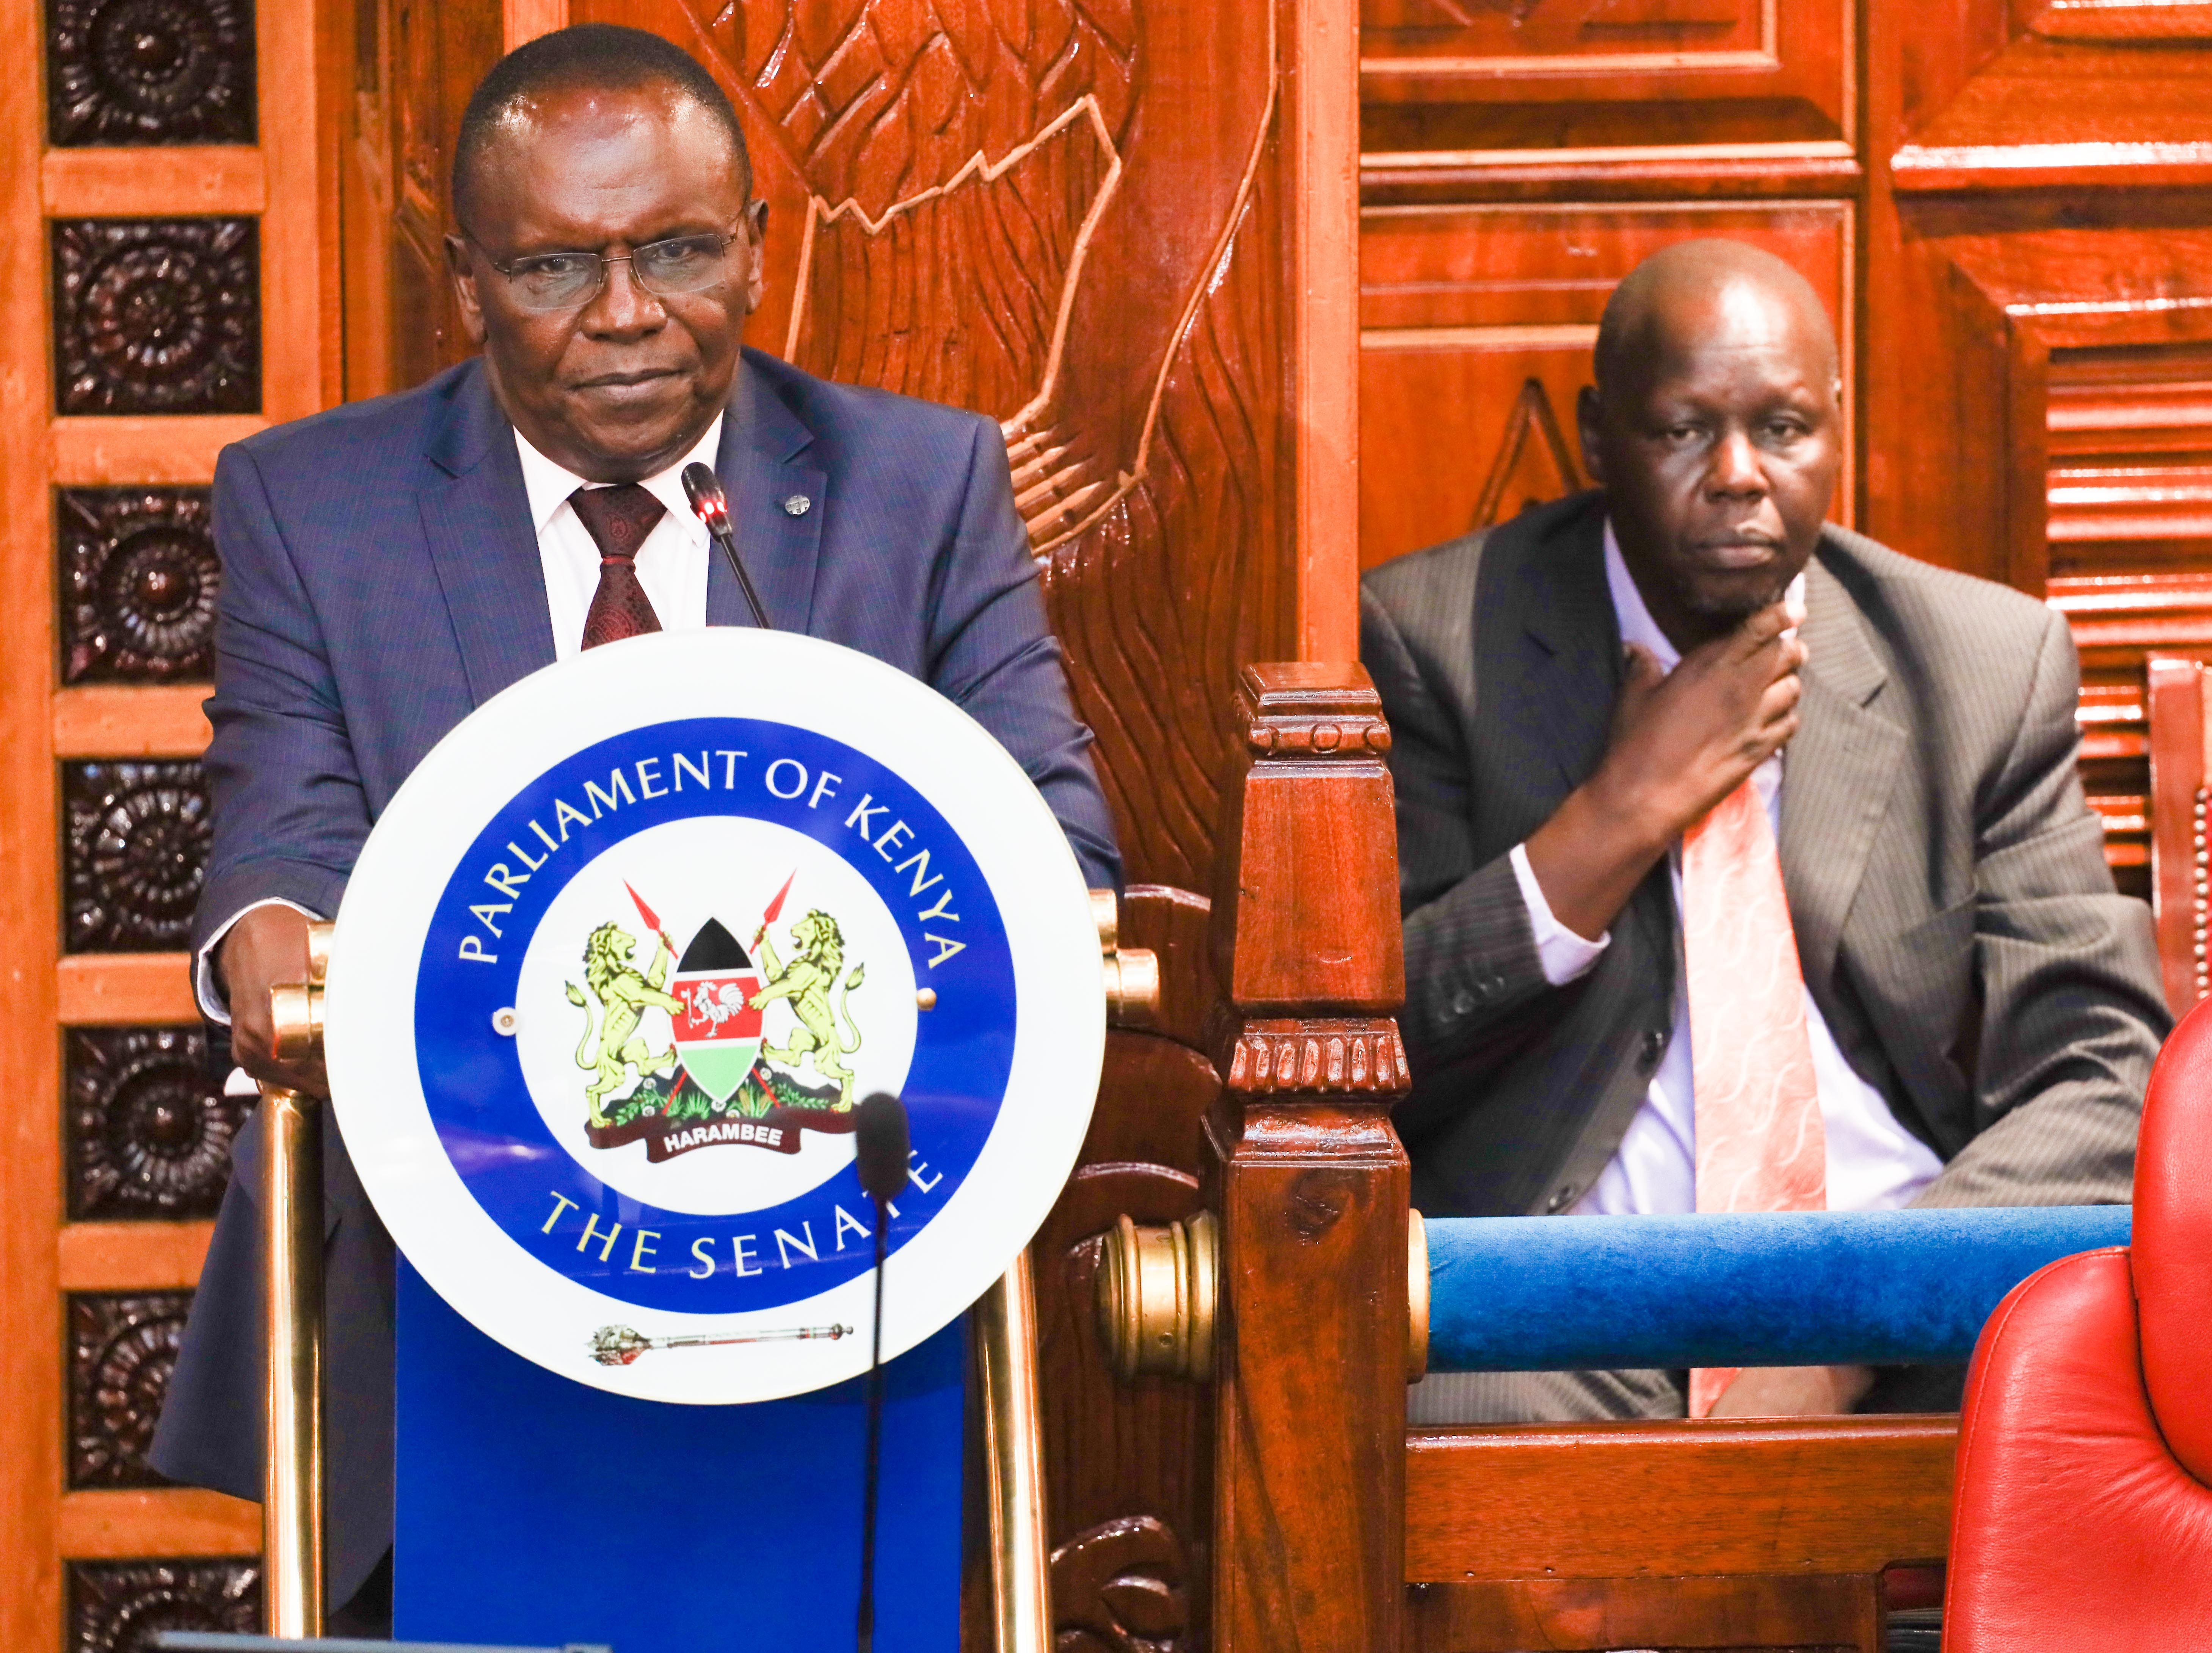 KISII DG IMPEACHMENT HEARING EXTENDS LATE INTO THE NIGHT ON DAY ONE